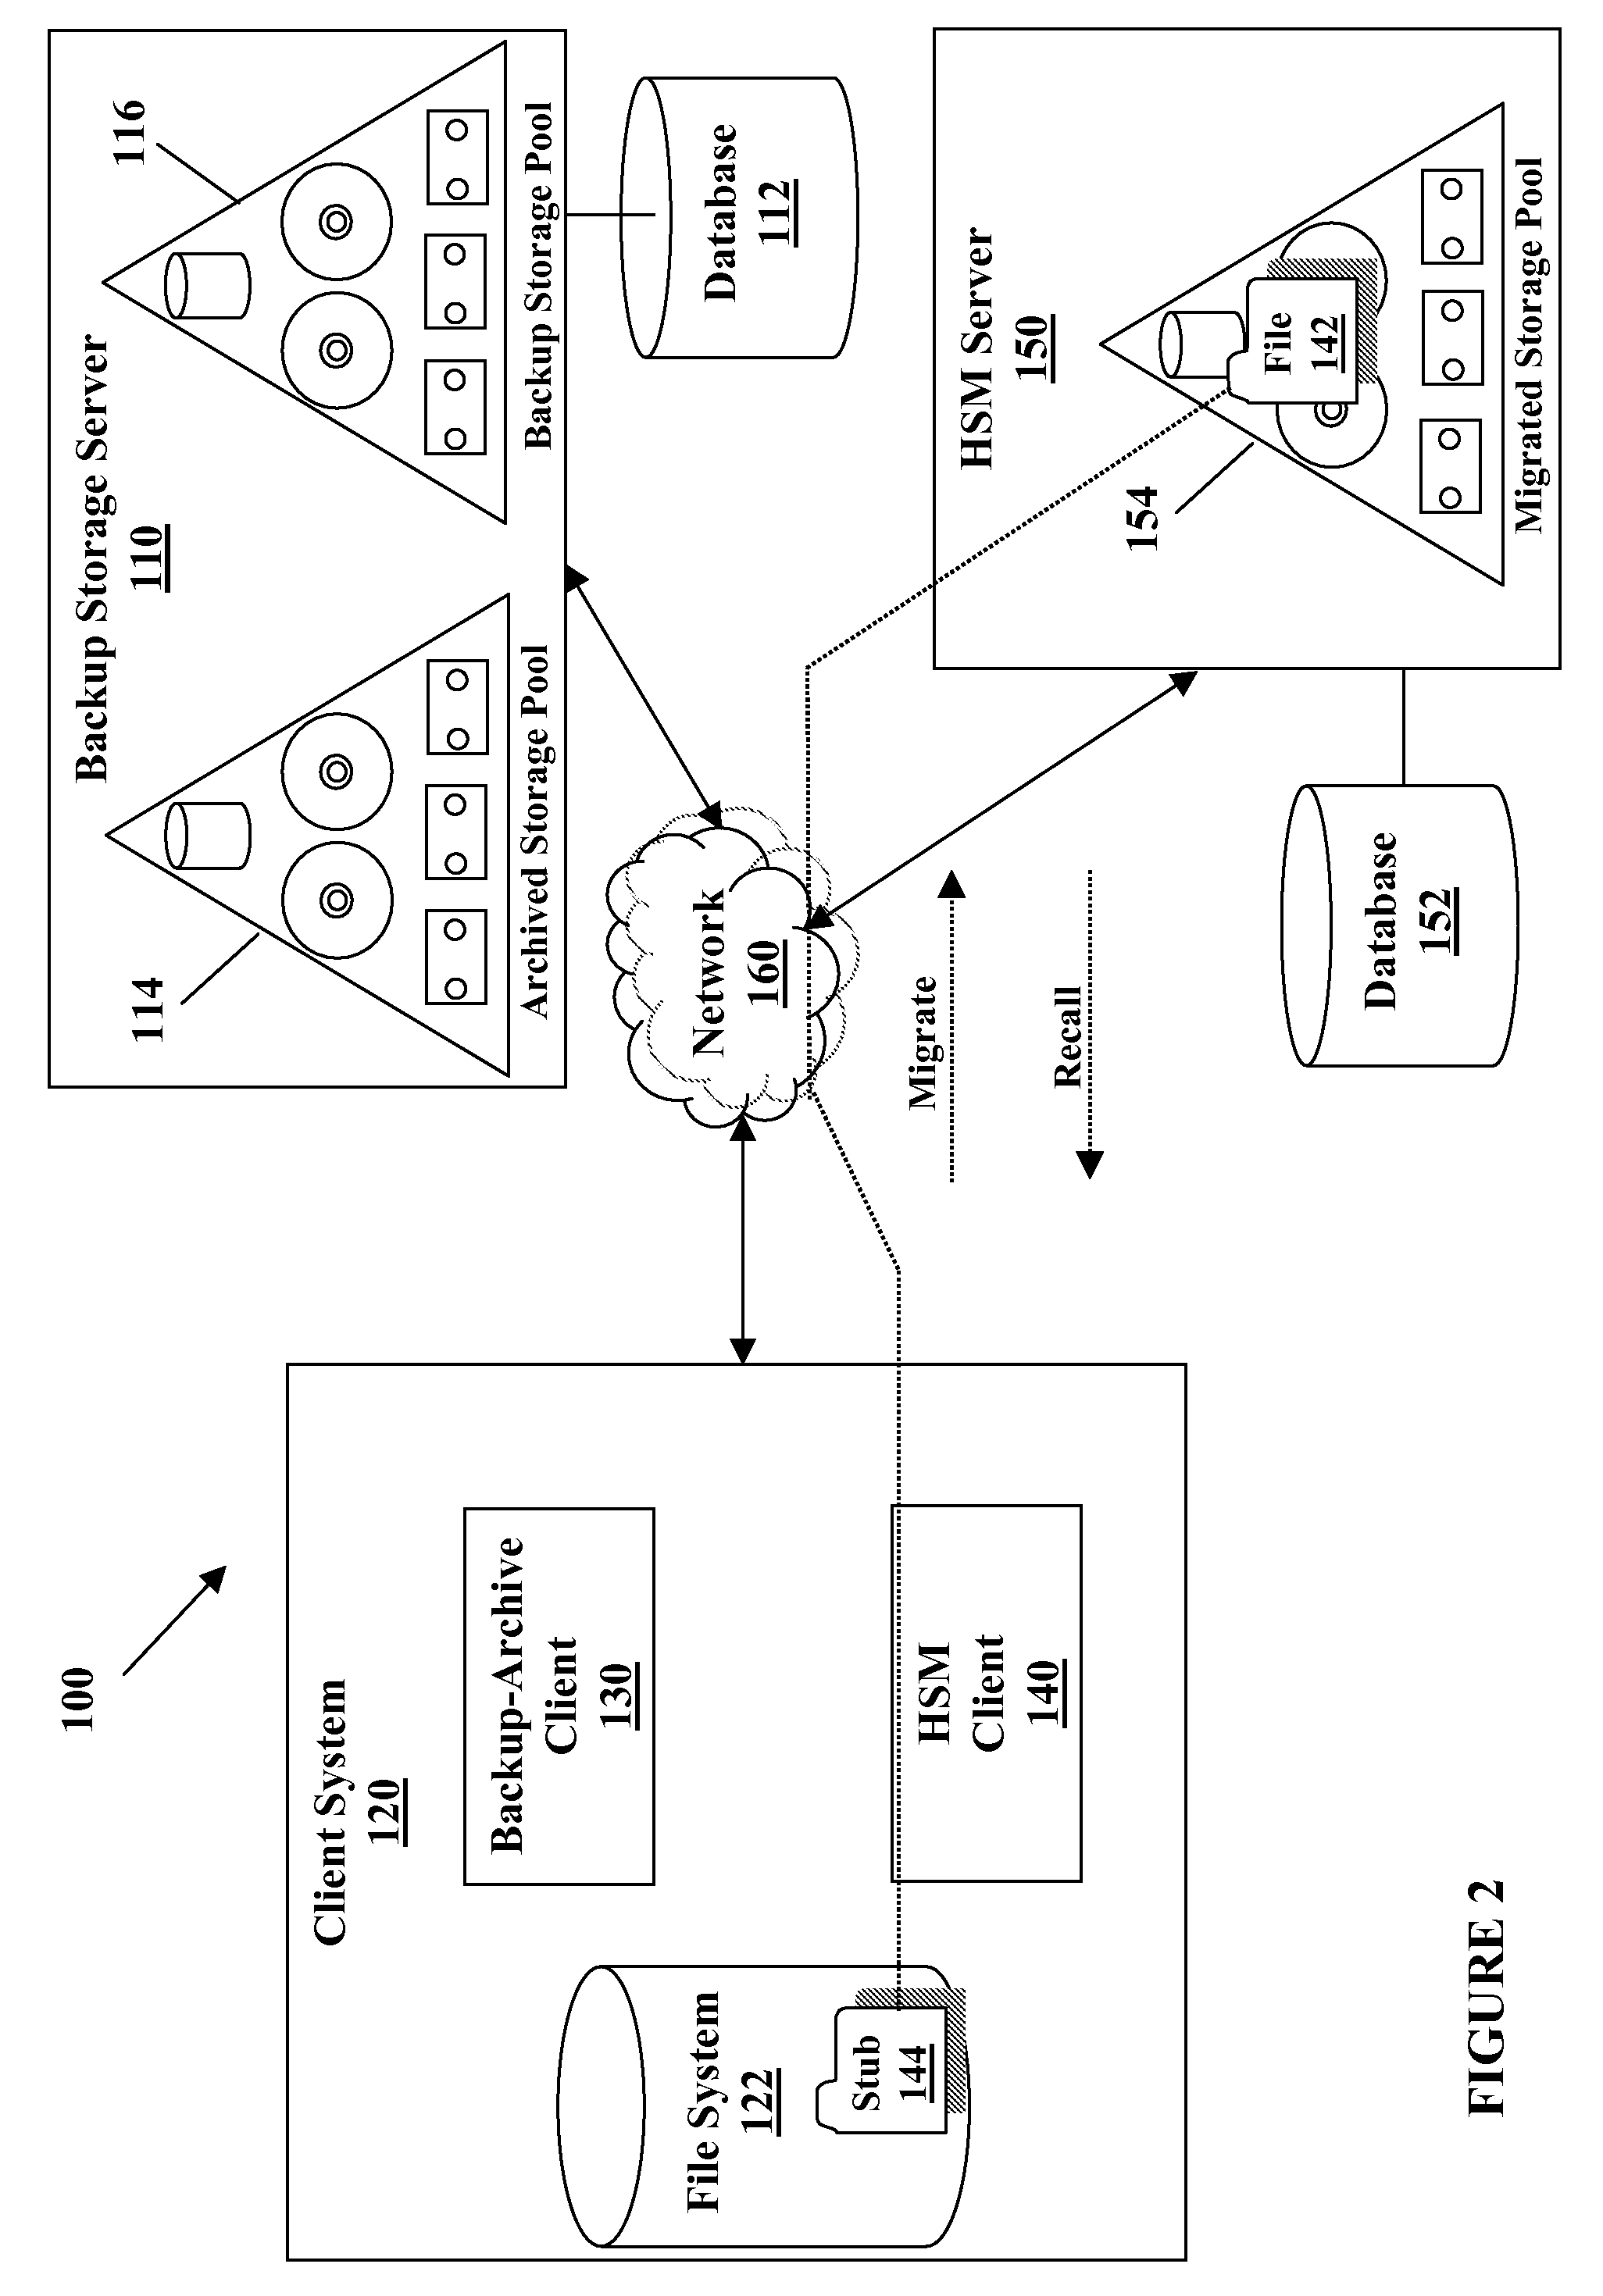 System and method for providing a backup/restore interface for third party hsm clients